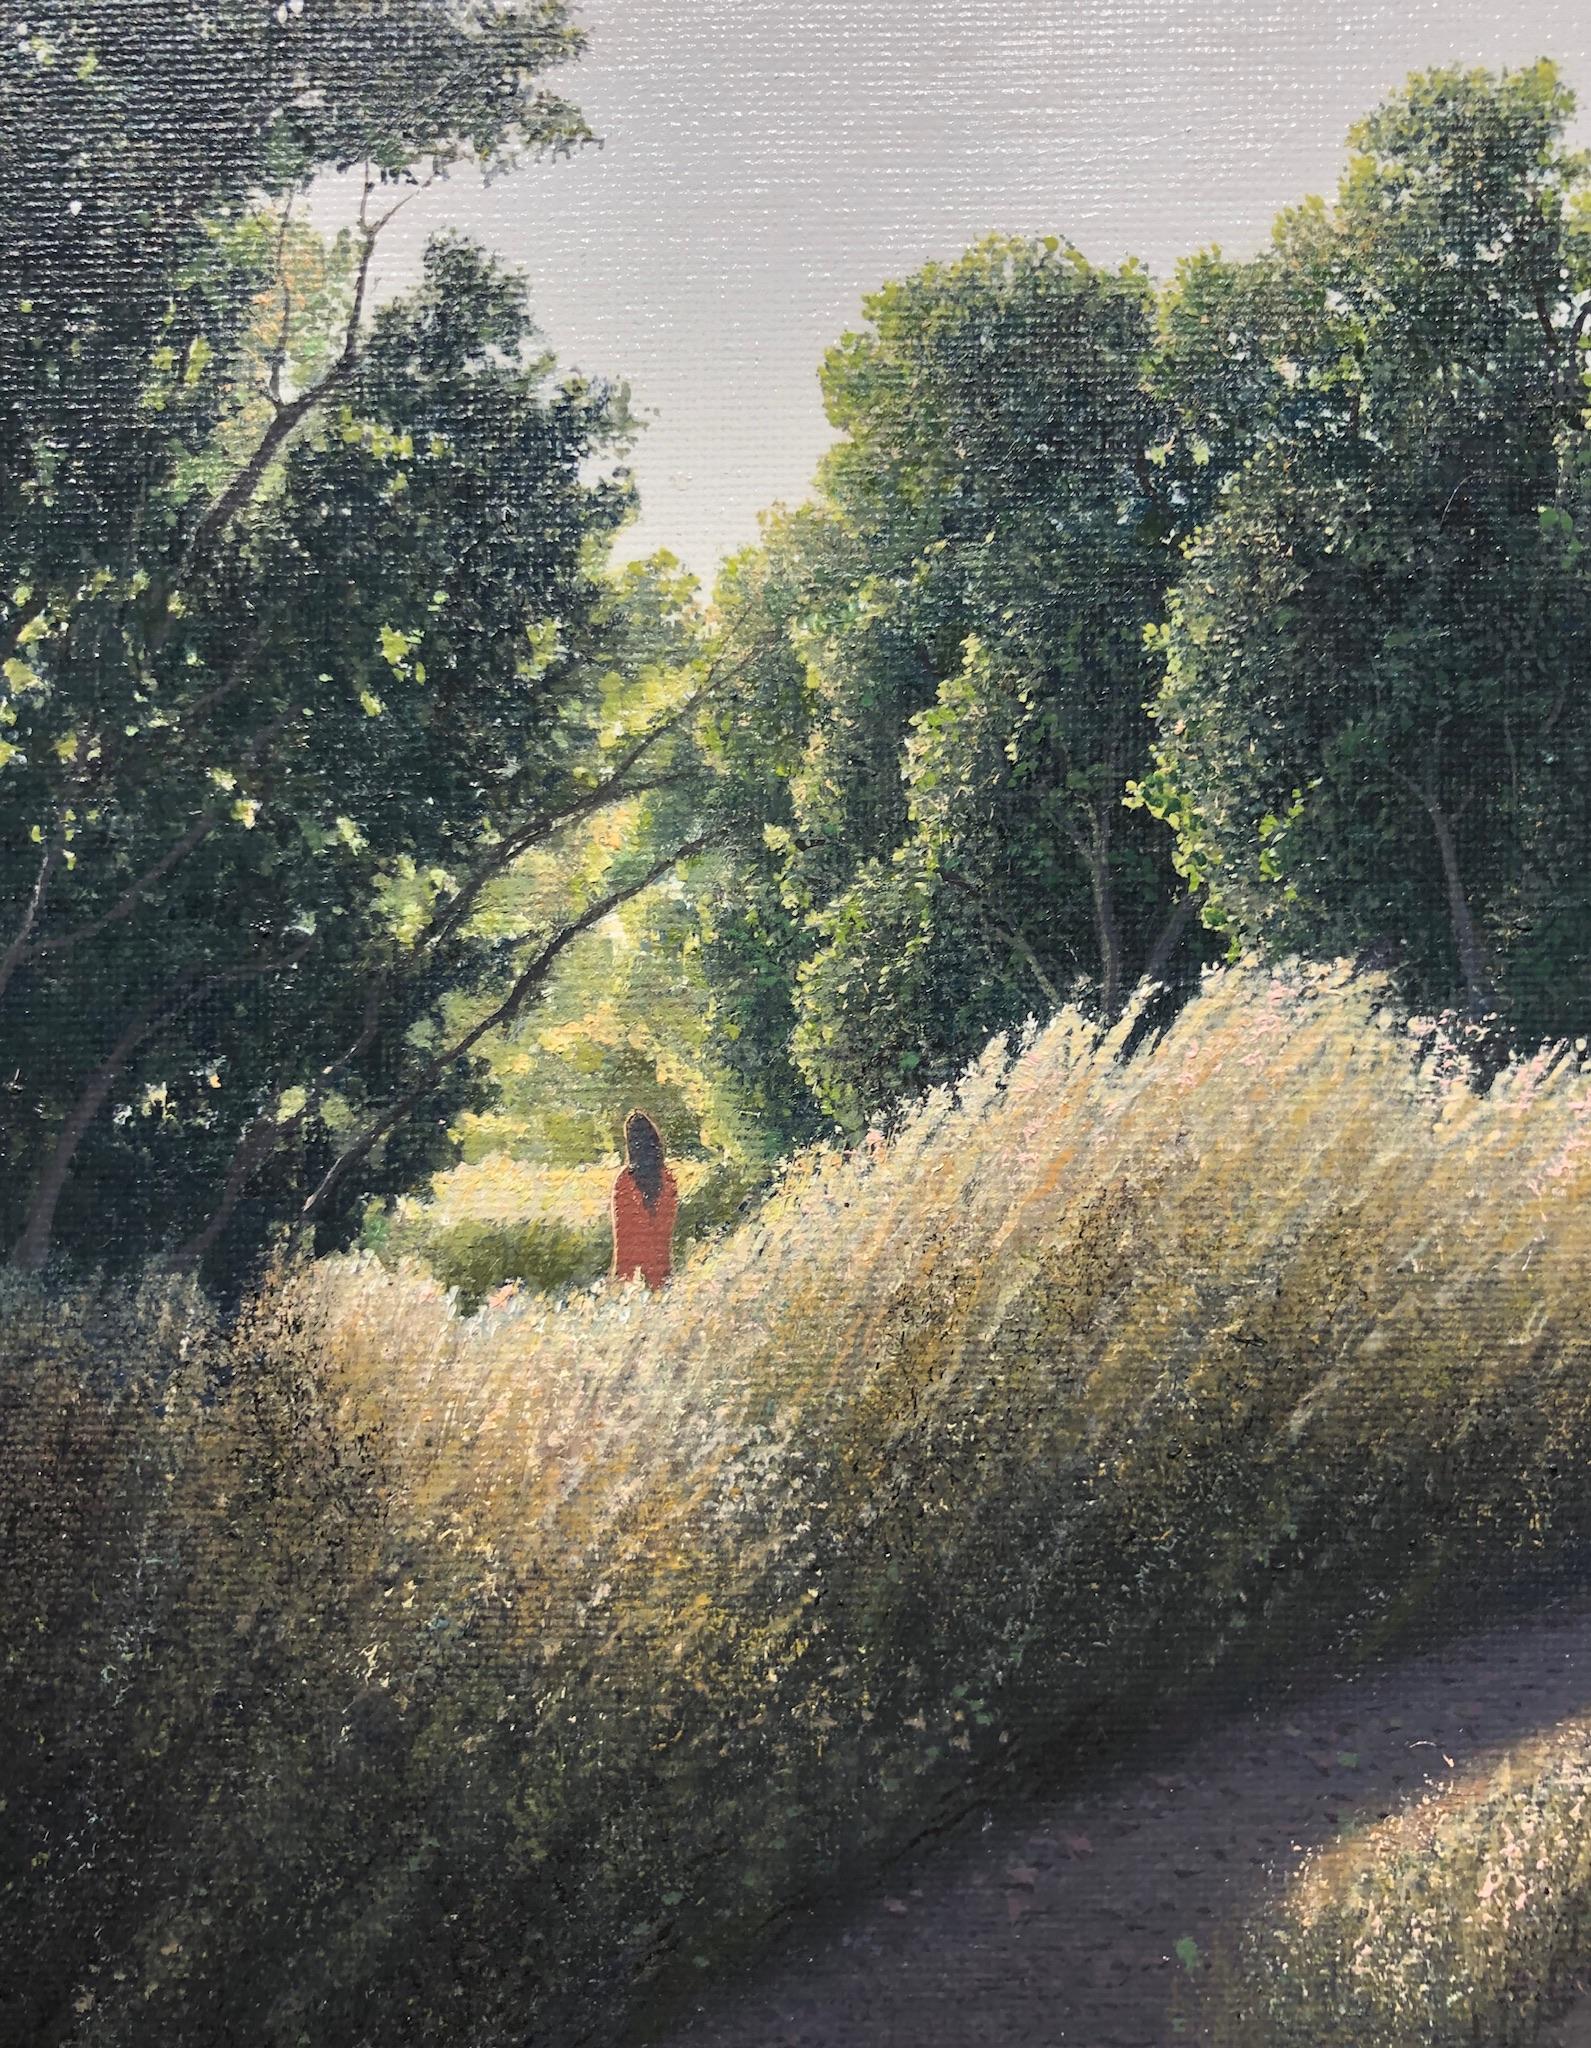 Cerca de Casa, Surreal Country Road with Hidden Figure, Oil on Panel, Framed - Contemporary Painting by René Monzón Relova “Pozas”